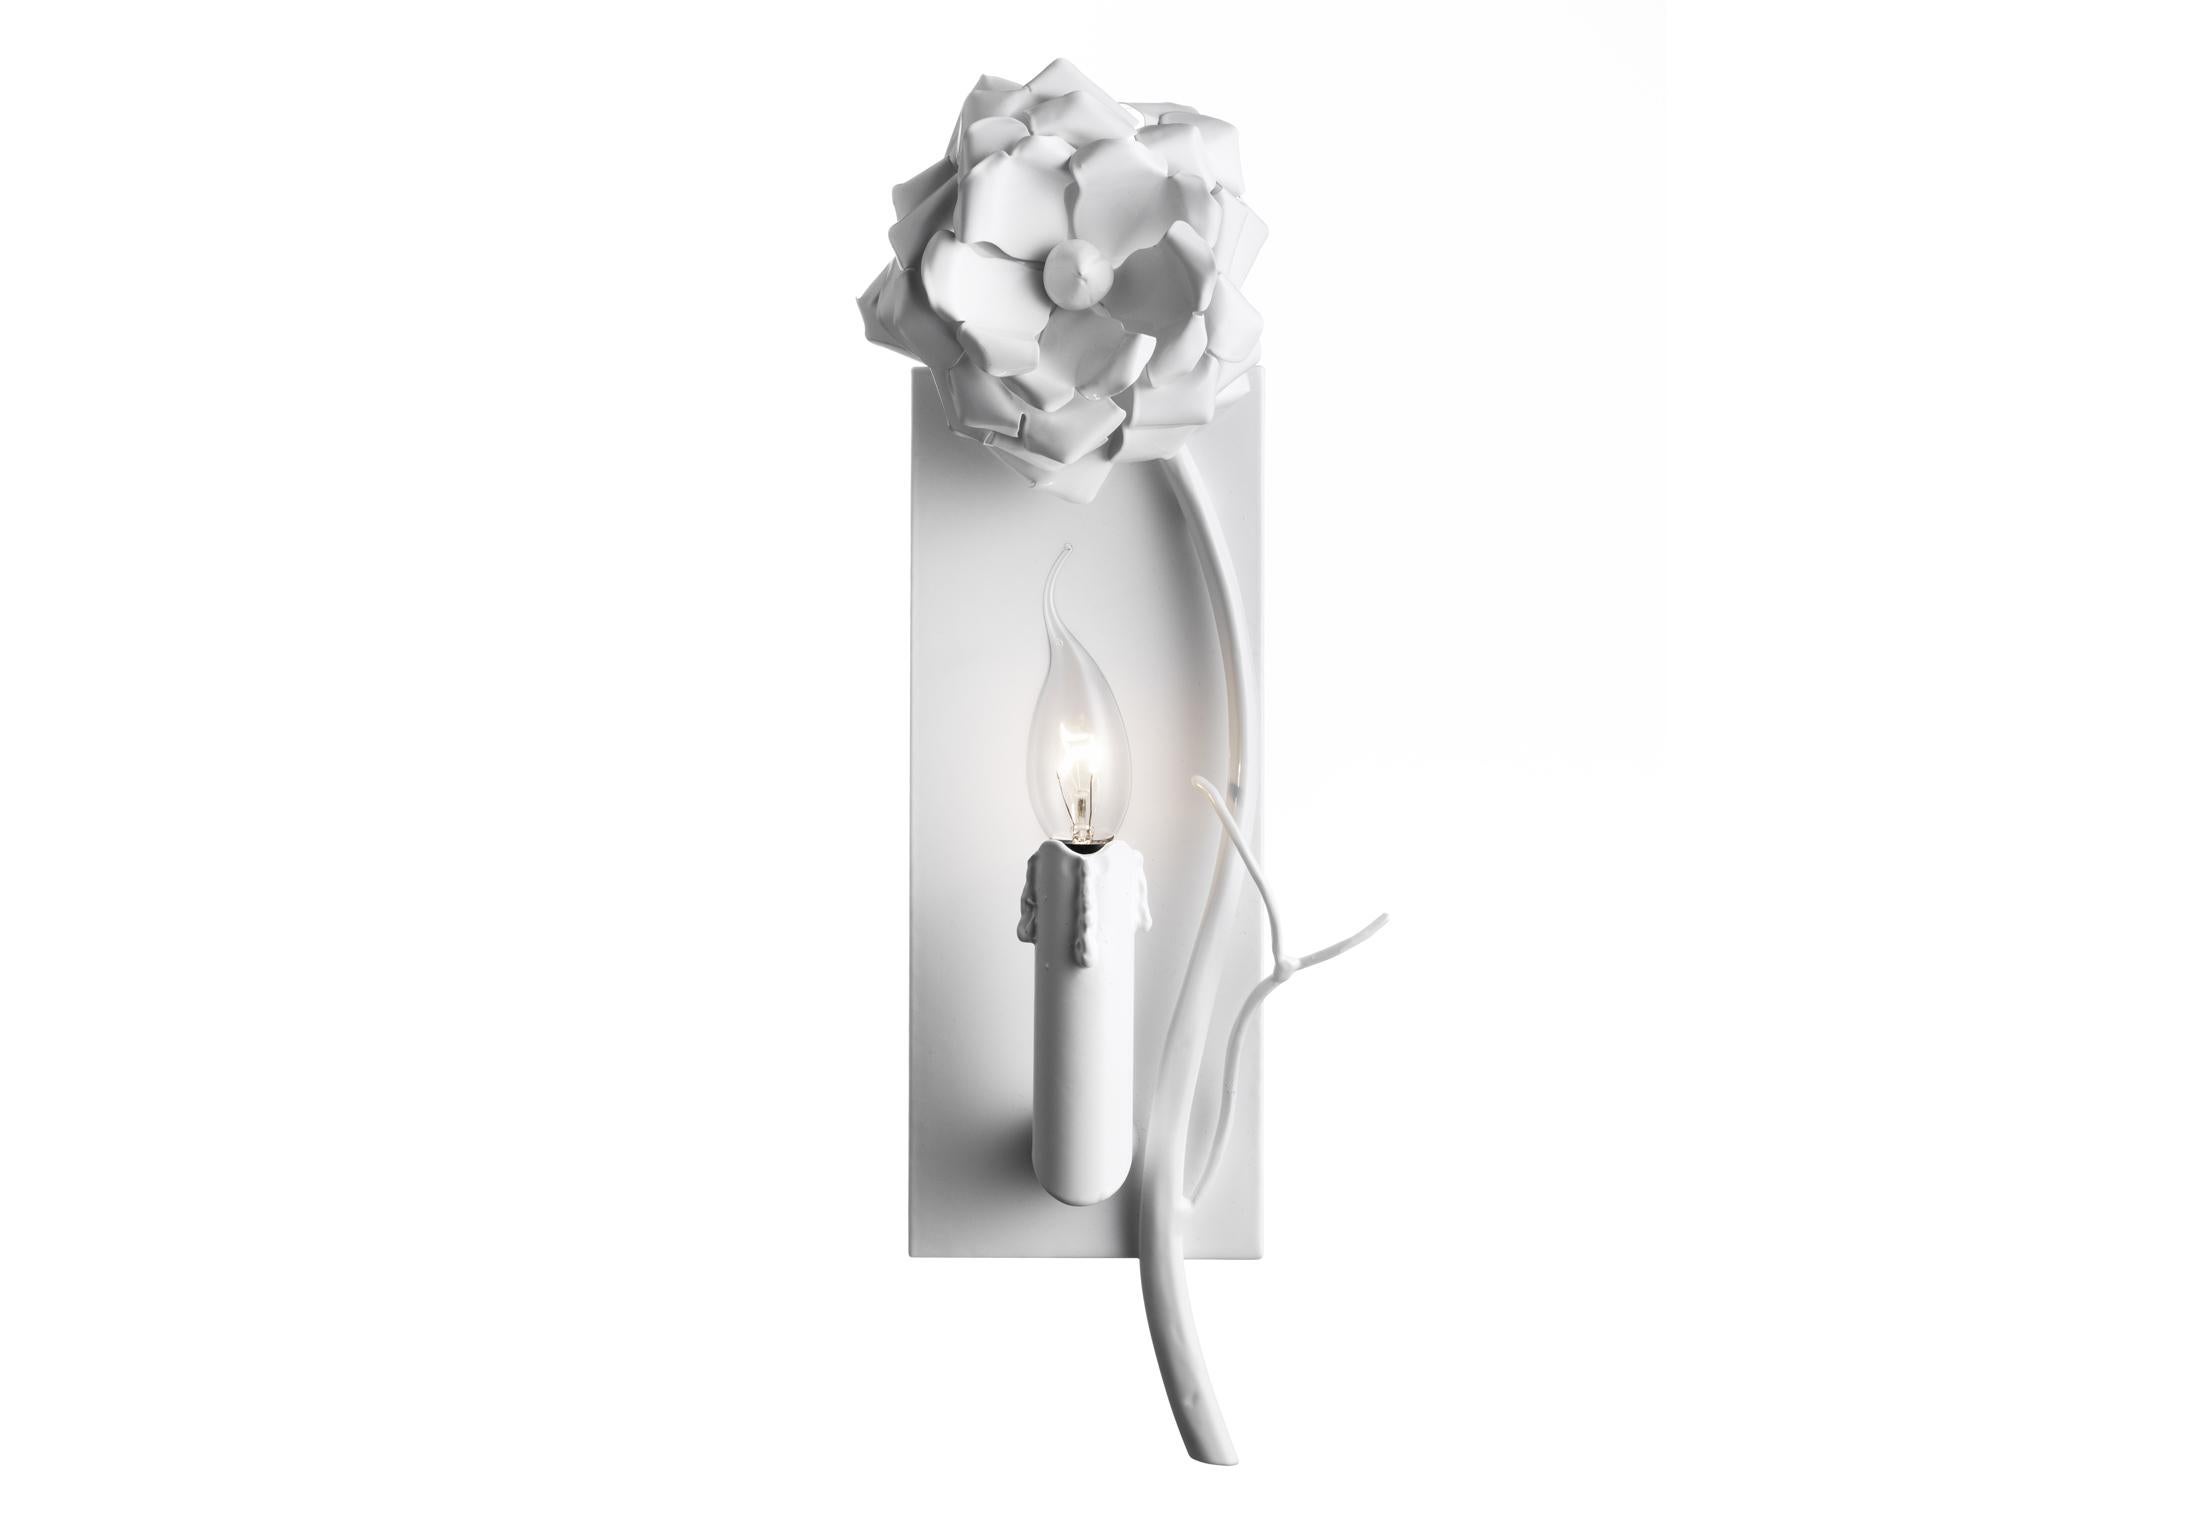 Brand van Egmond love you love you not wall lamp 
Brand van Egmond

Love You Love You Not fits into Brand van Egmond’s new collection as a waterfall of emotions. The name of this lamp refers to the image of a loved person picking petals and